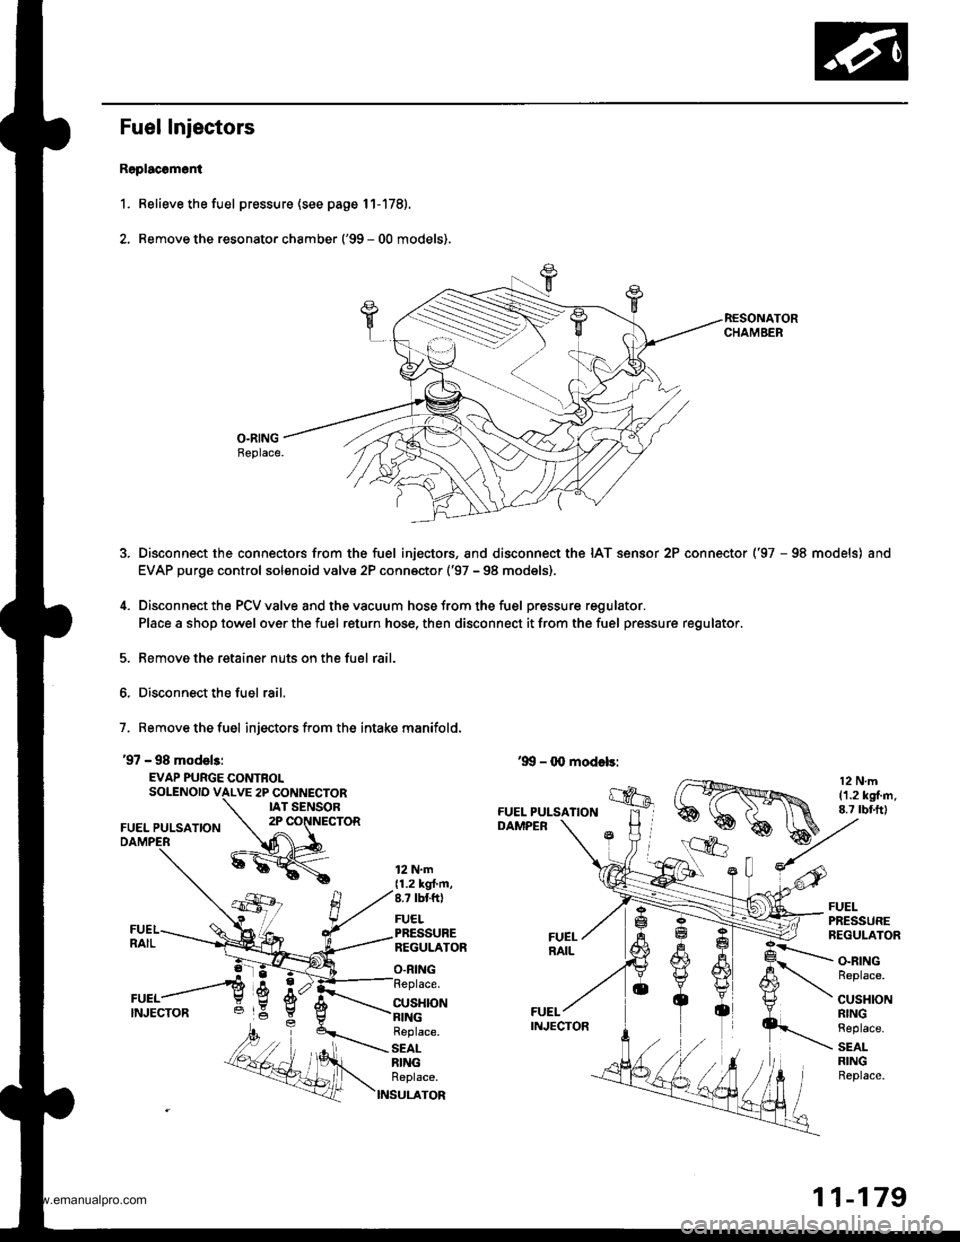 HONDA CR-V 1998 RD1-RD3 / 1.G User Guide 
Fuel Injectors
R6placomoni
1. Relieve the fuel pressure (see page 11-178).
2. Remove the resonato. chamber (99 - 00 models).
O.RINGBeplace.
Disconnect the connectors from the fuel injectors, and dis